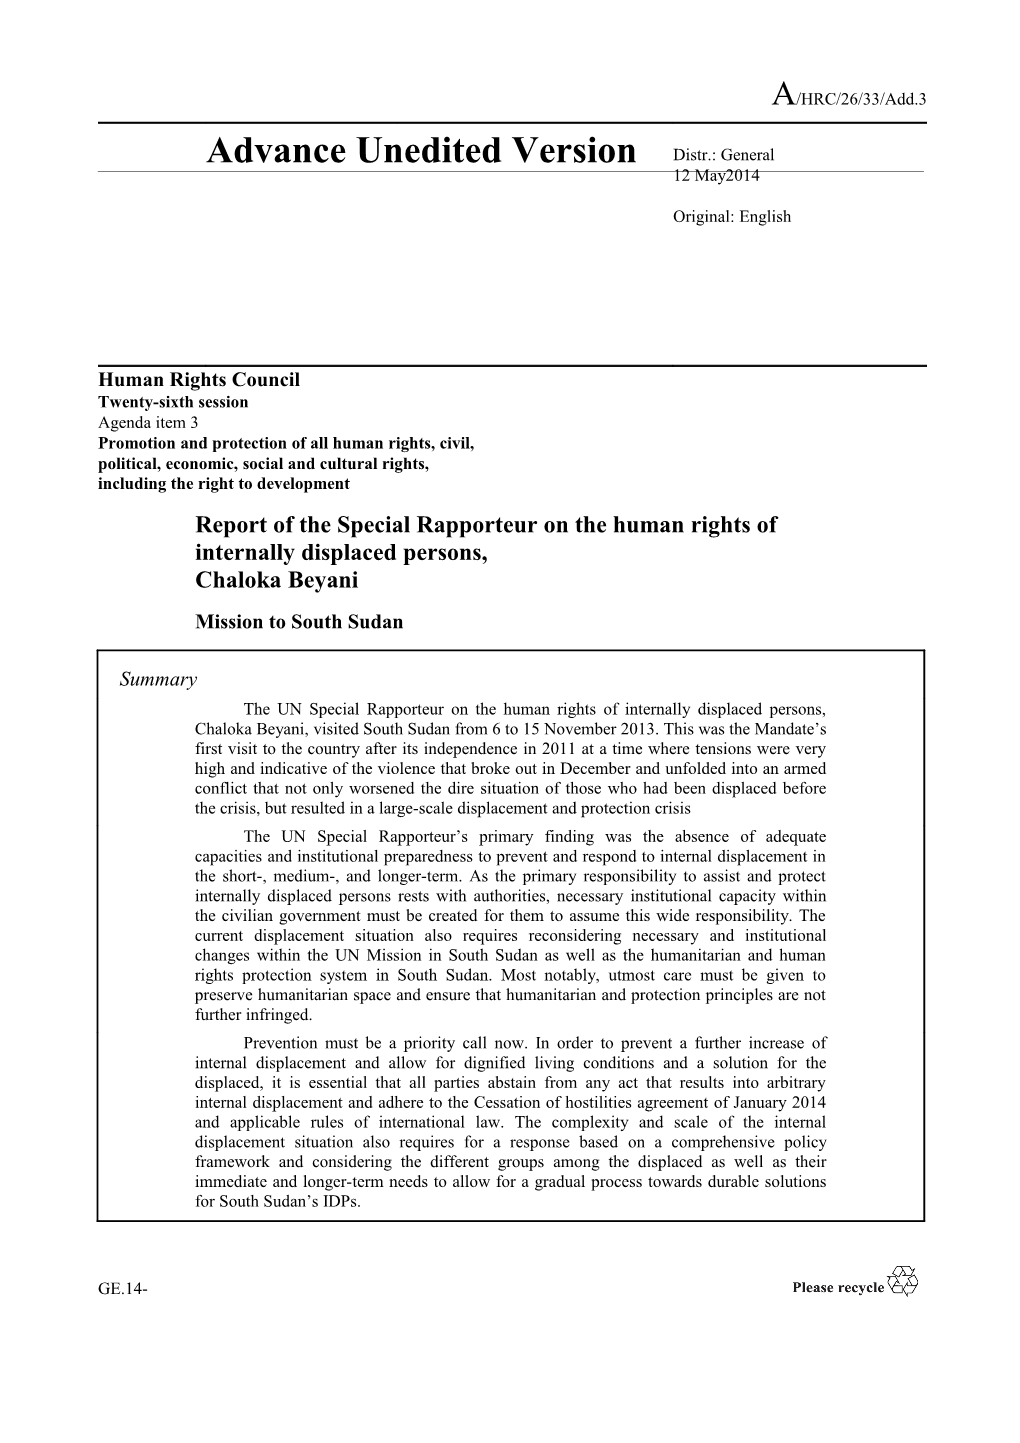 Report of the Special Rapporteur on the Human Rights of Internally Displaced Persons